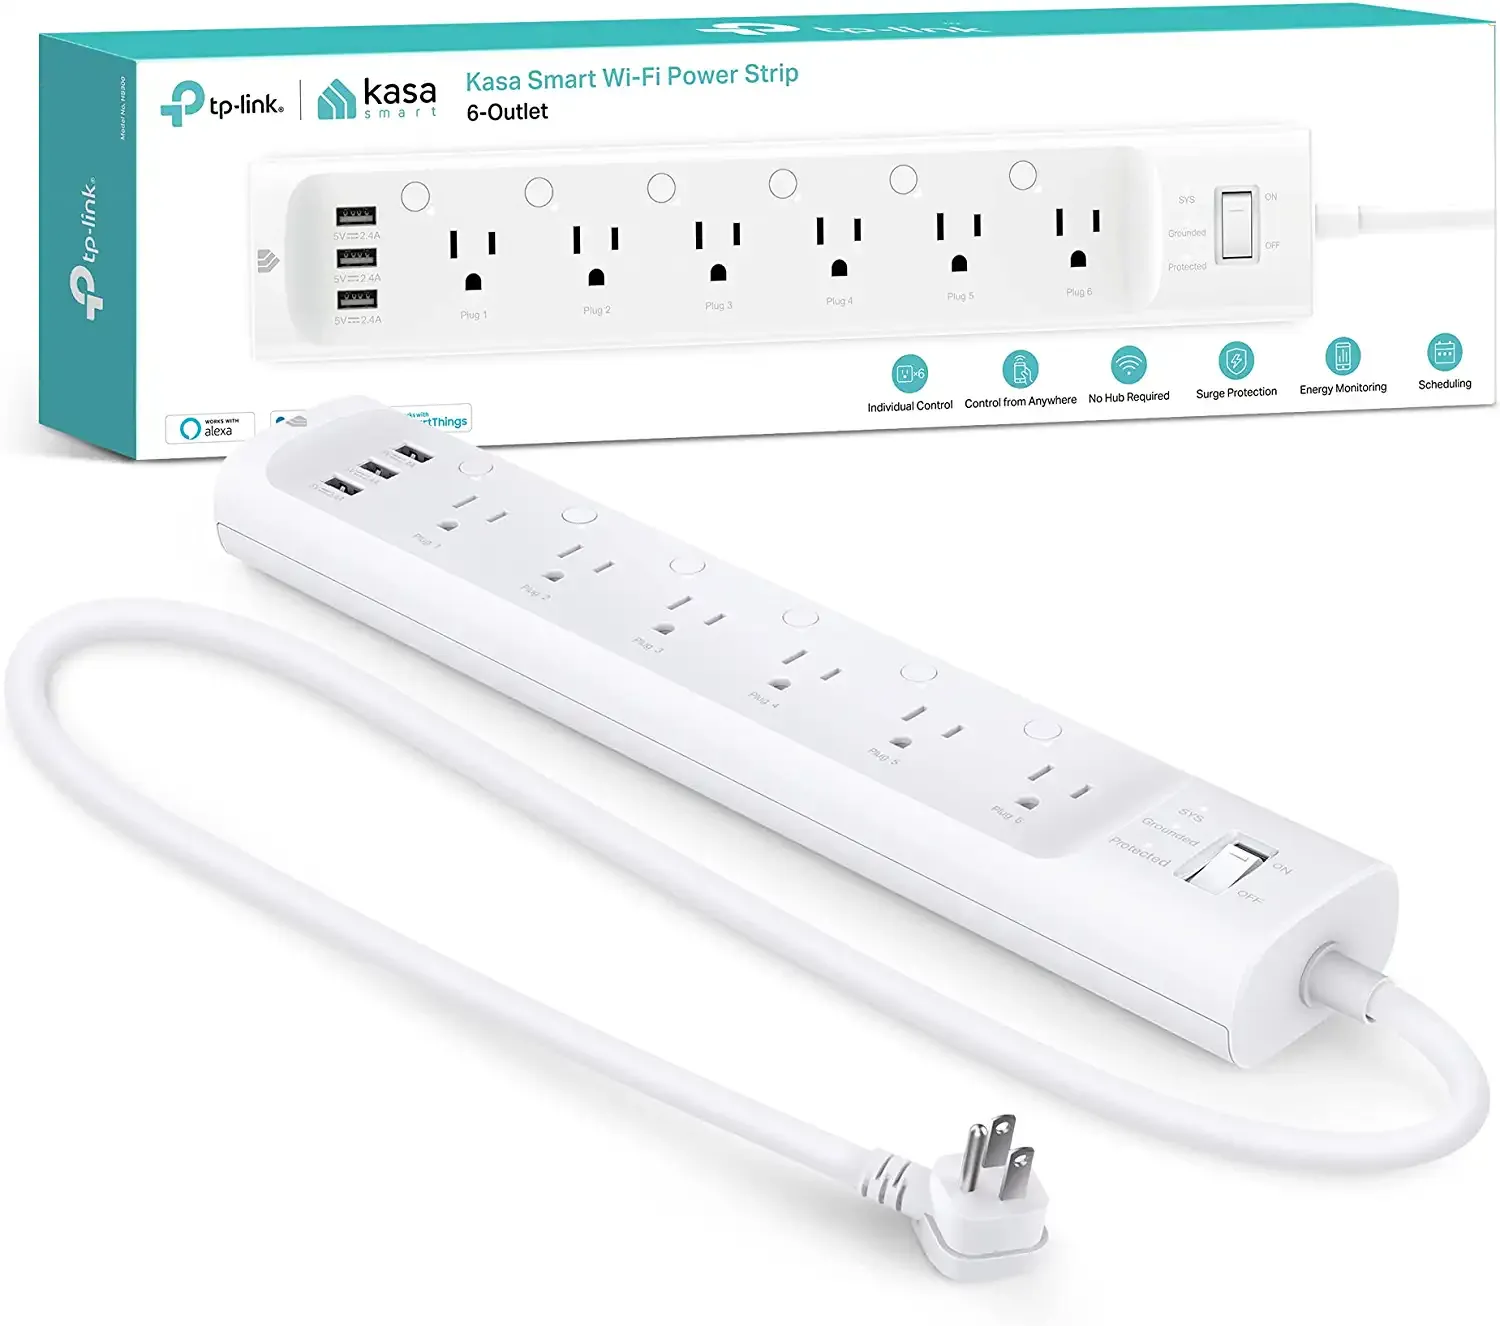 When you need more than one smart plug in one room you need a smart power strip like this one. Each socket is individually controlled, the strip has surge protection and even a trio of USB ports and  energy monitoring so you can check each connected device individually.